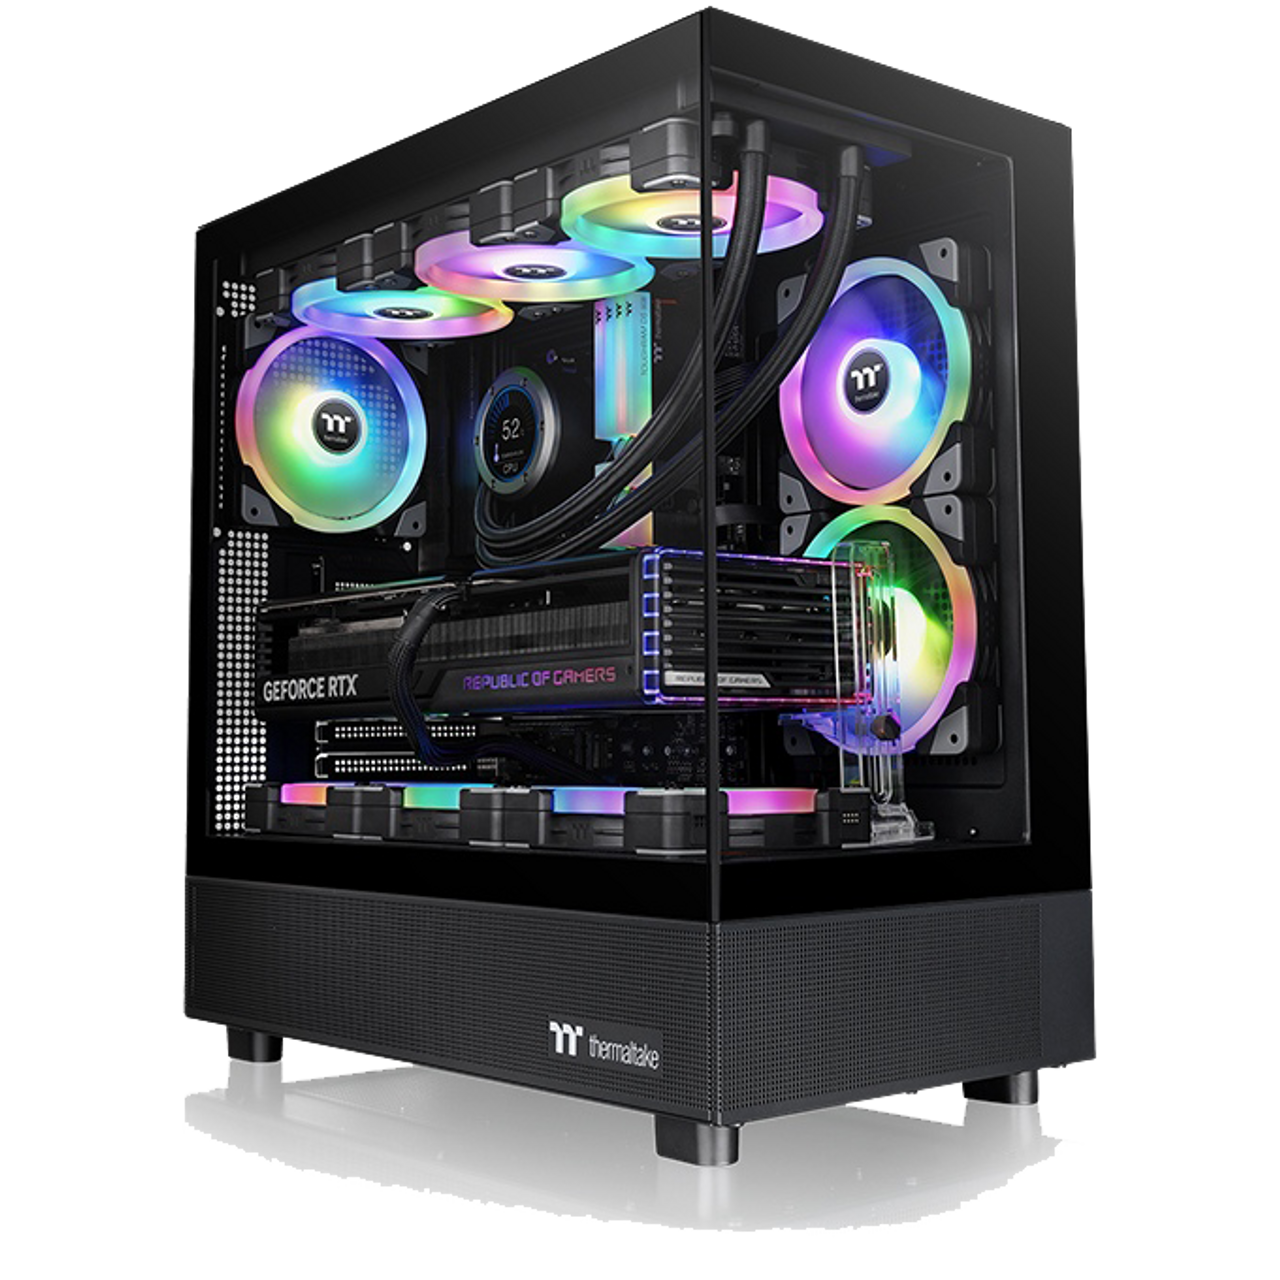 Thermaltake-View-270-TG-ARGB-Mid-Tower-Chassis